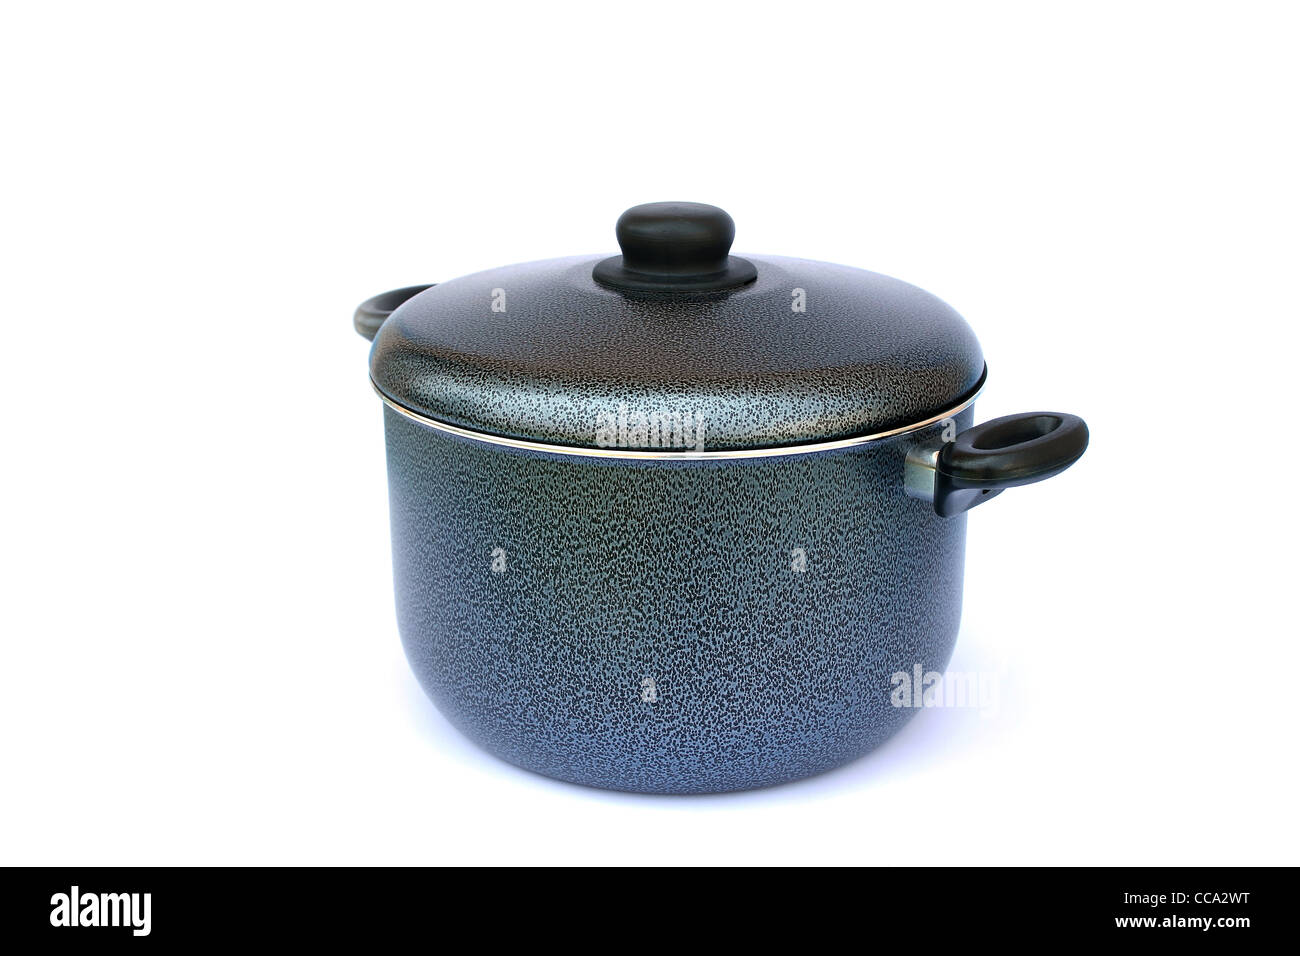 Cooking pot isolated on white background. Stock Photo